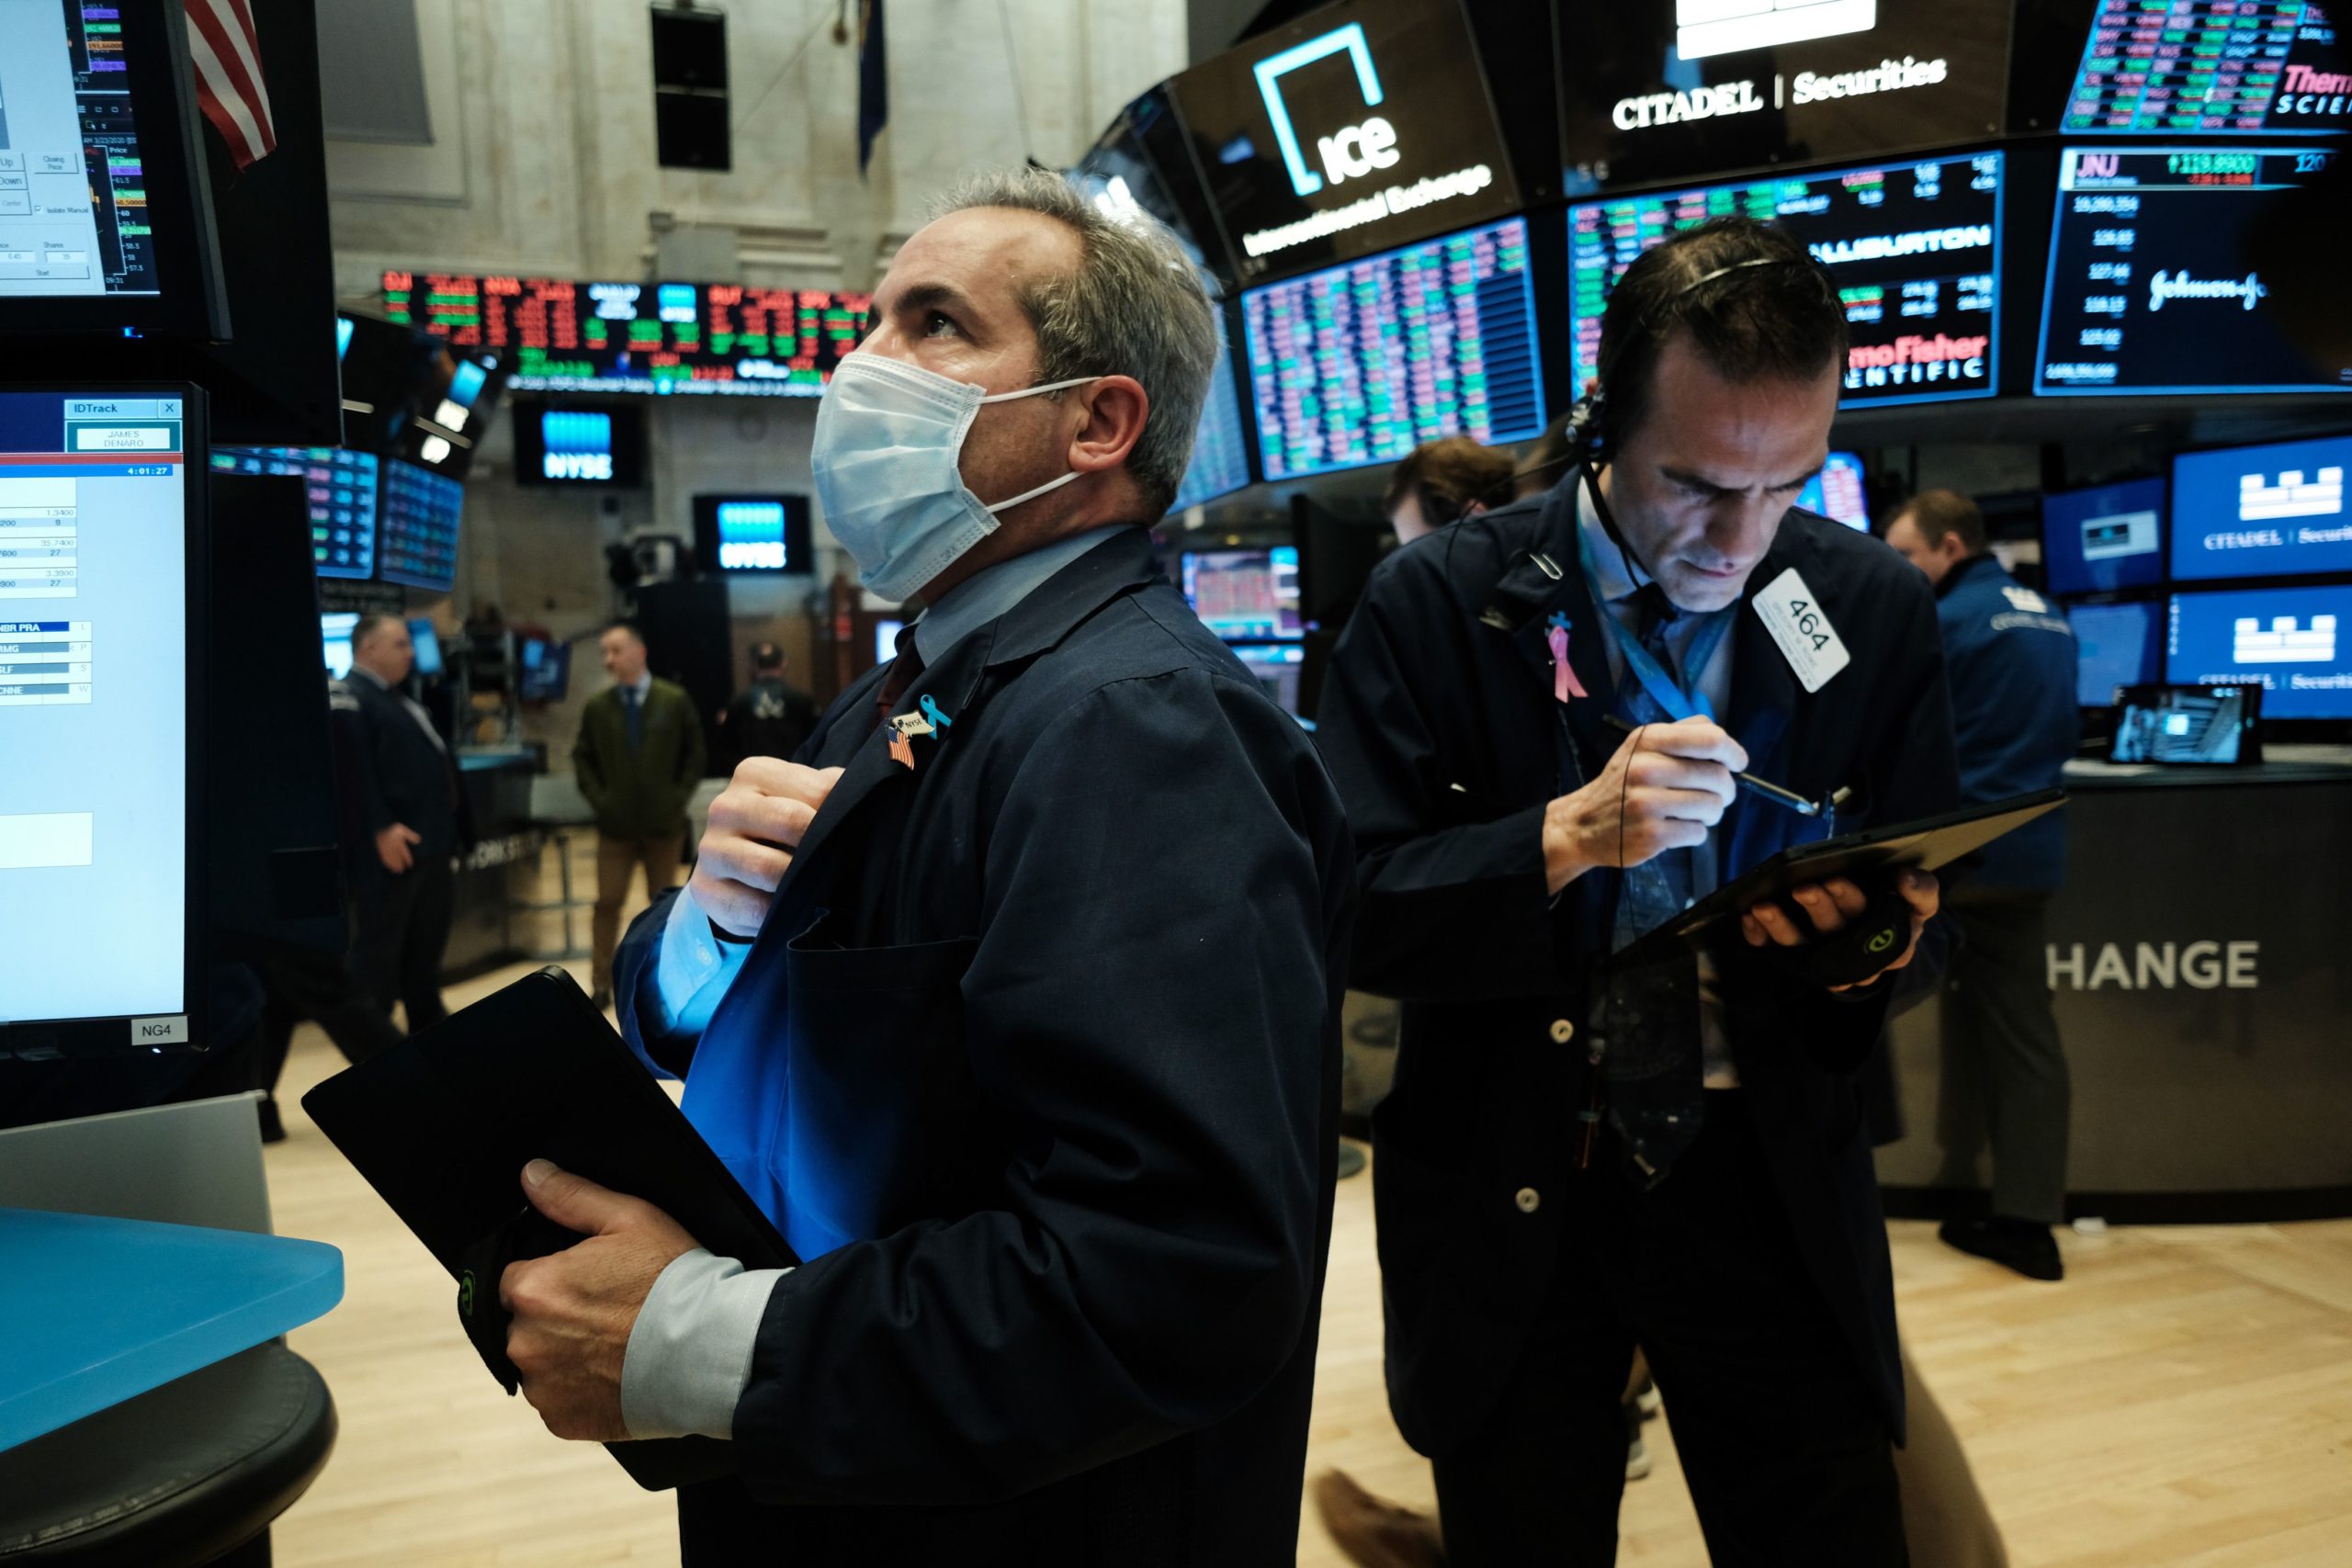 On Volatile Day S&P 500 Fall 60 Points : Oil Stocks Sink rapidly , Apple guide Stocks Down Again